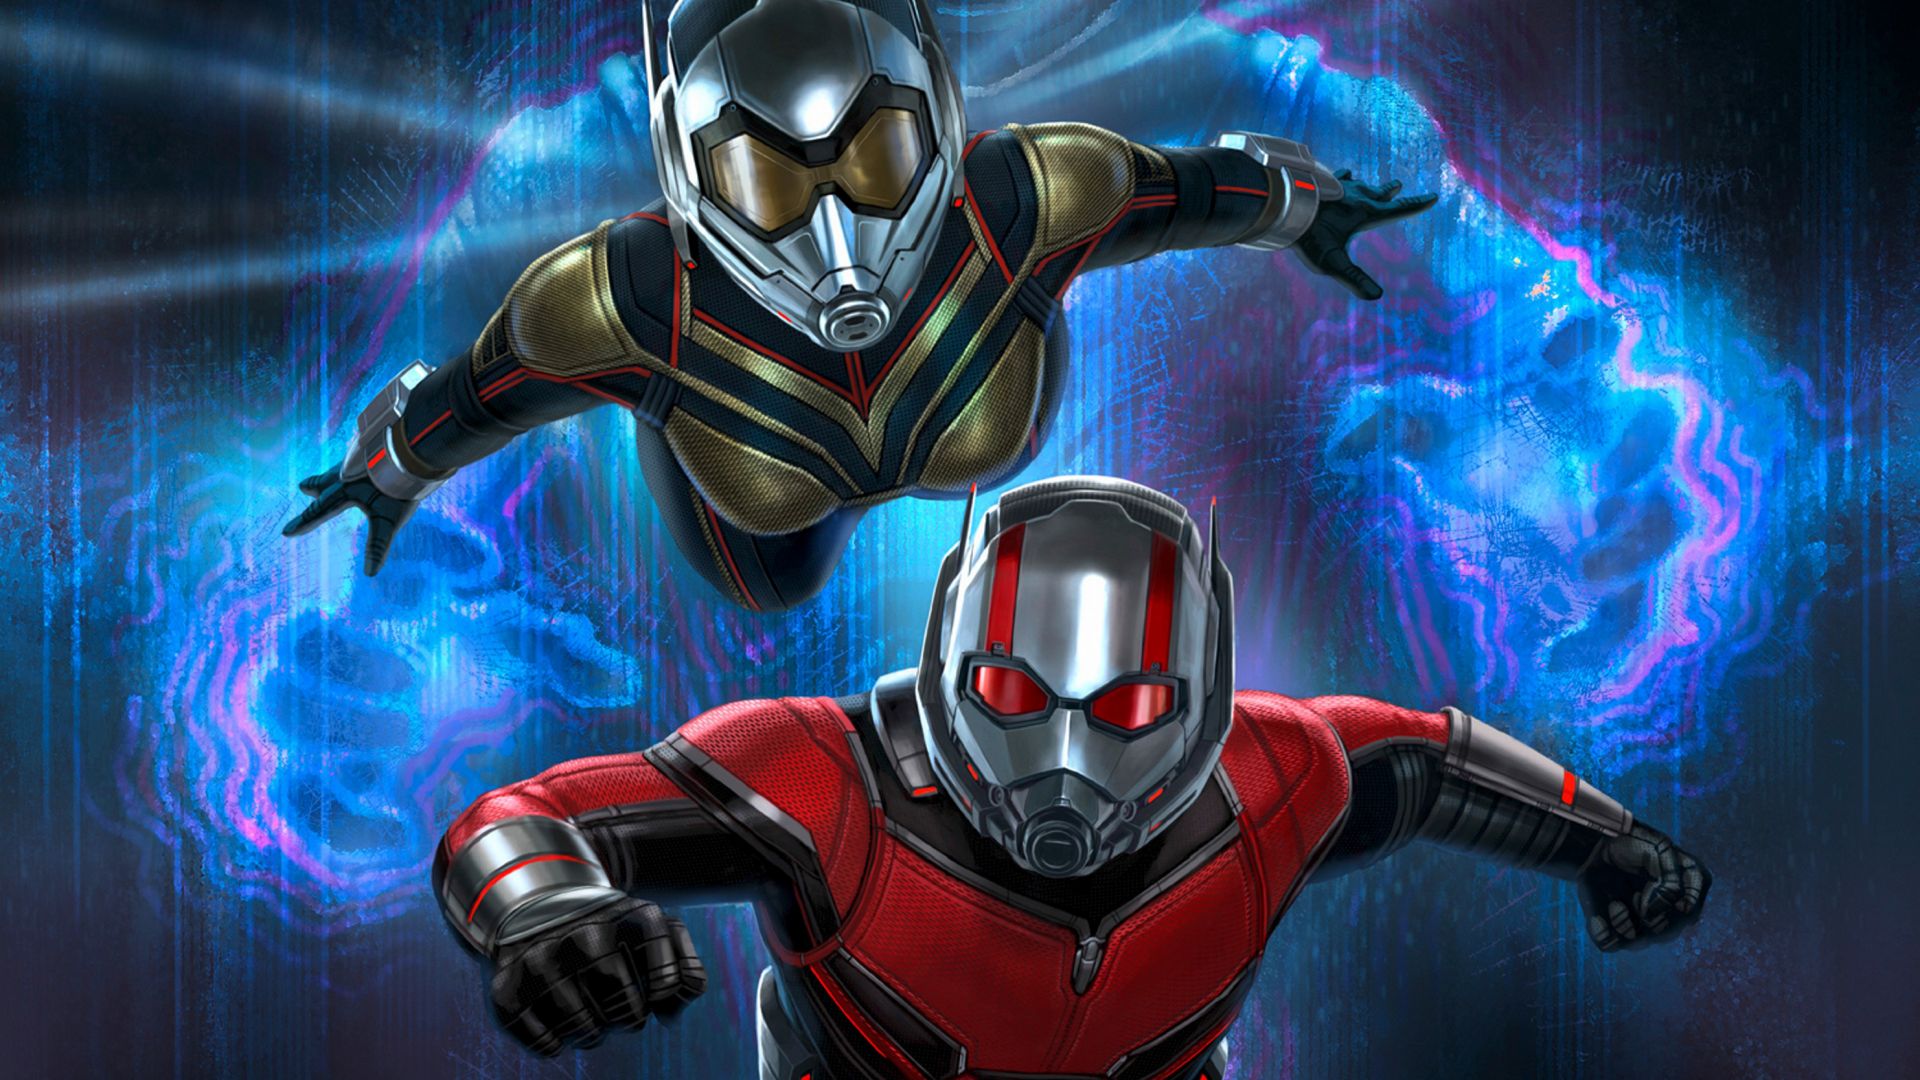 Desktop Wallpaper Ant Man And The Wasp, Empire Magazine, Movie, HD Image, Picture, Background, 73aeab